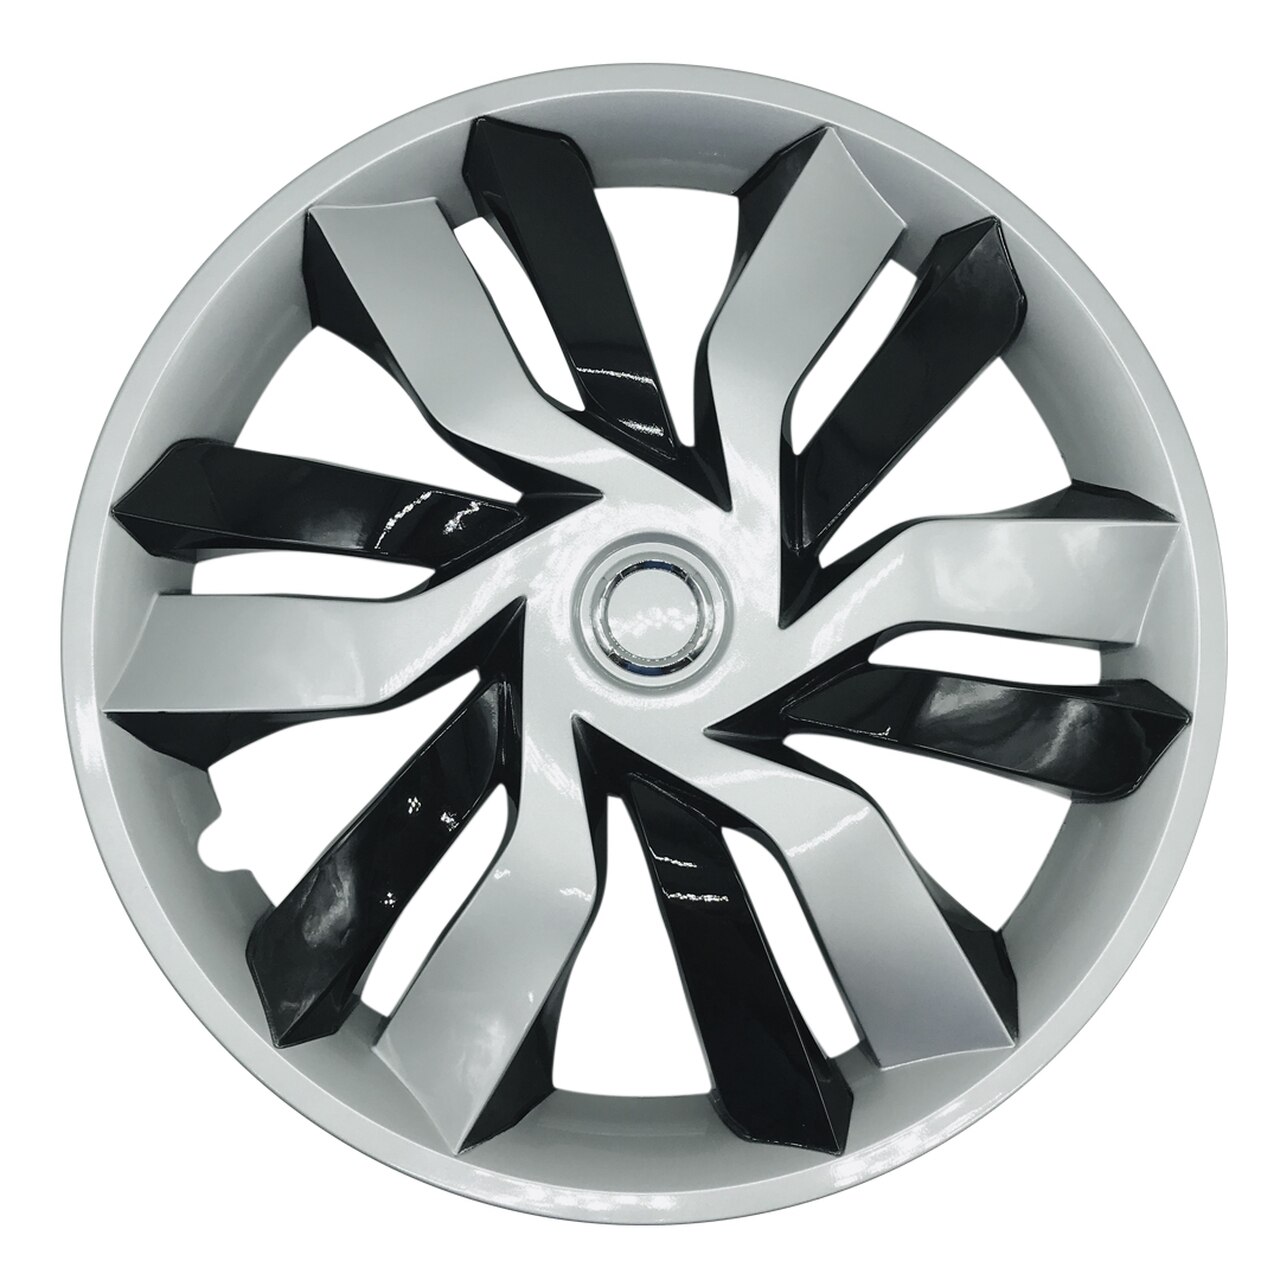 MWC 446665 Hubcaps Wheel Covers 15 inch 4 Set Silver-Black